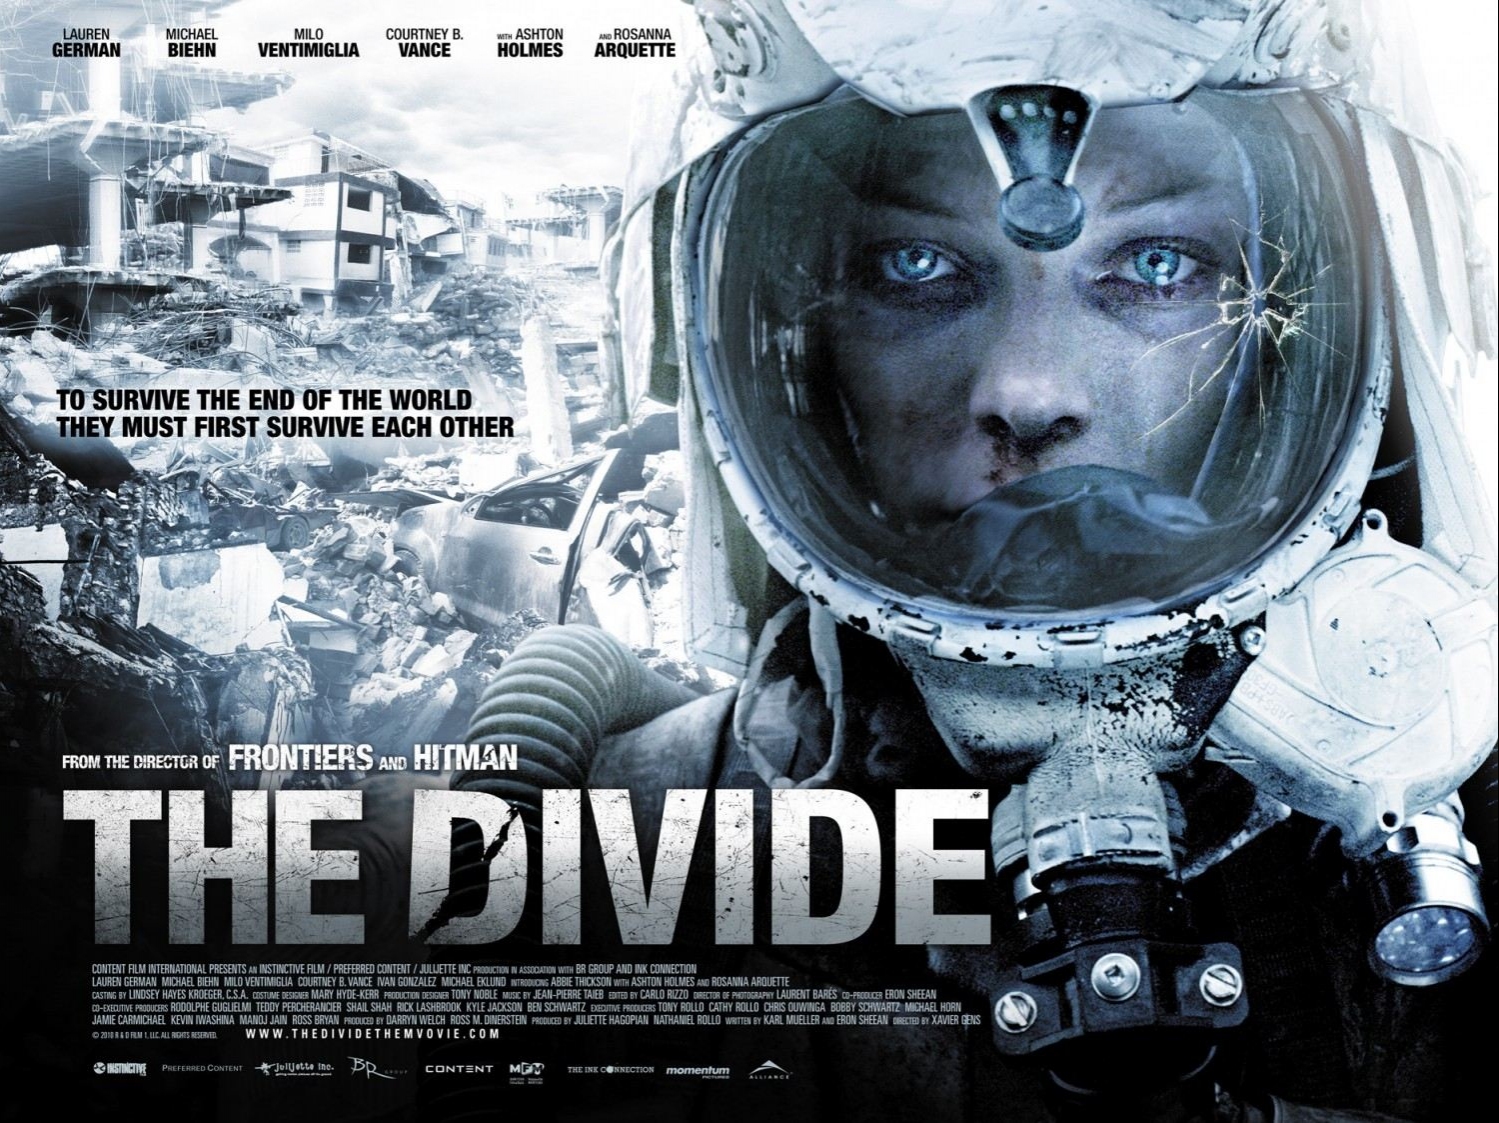 The Divide #17